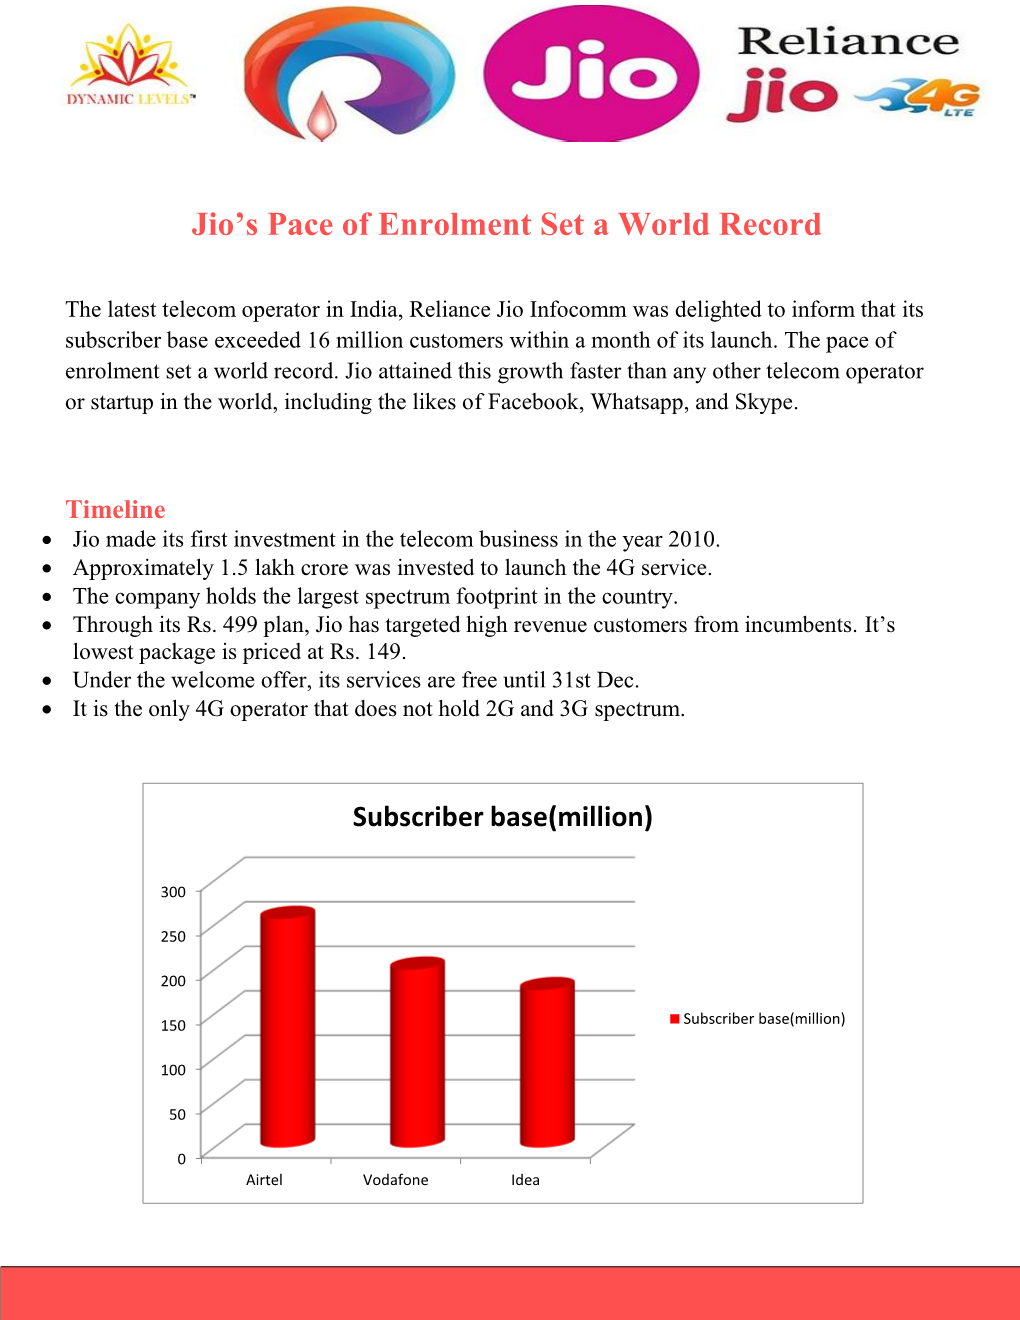 Jio's Pace of Enrolment Set a World Record